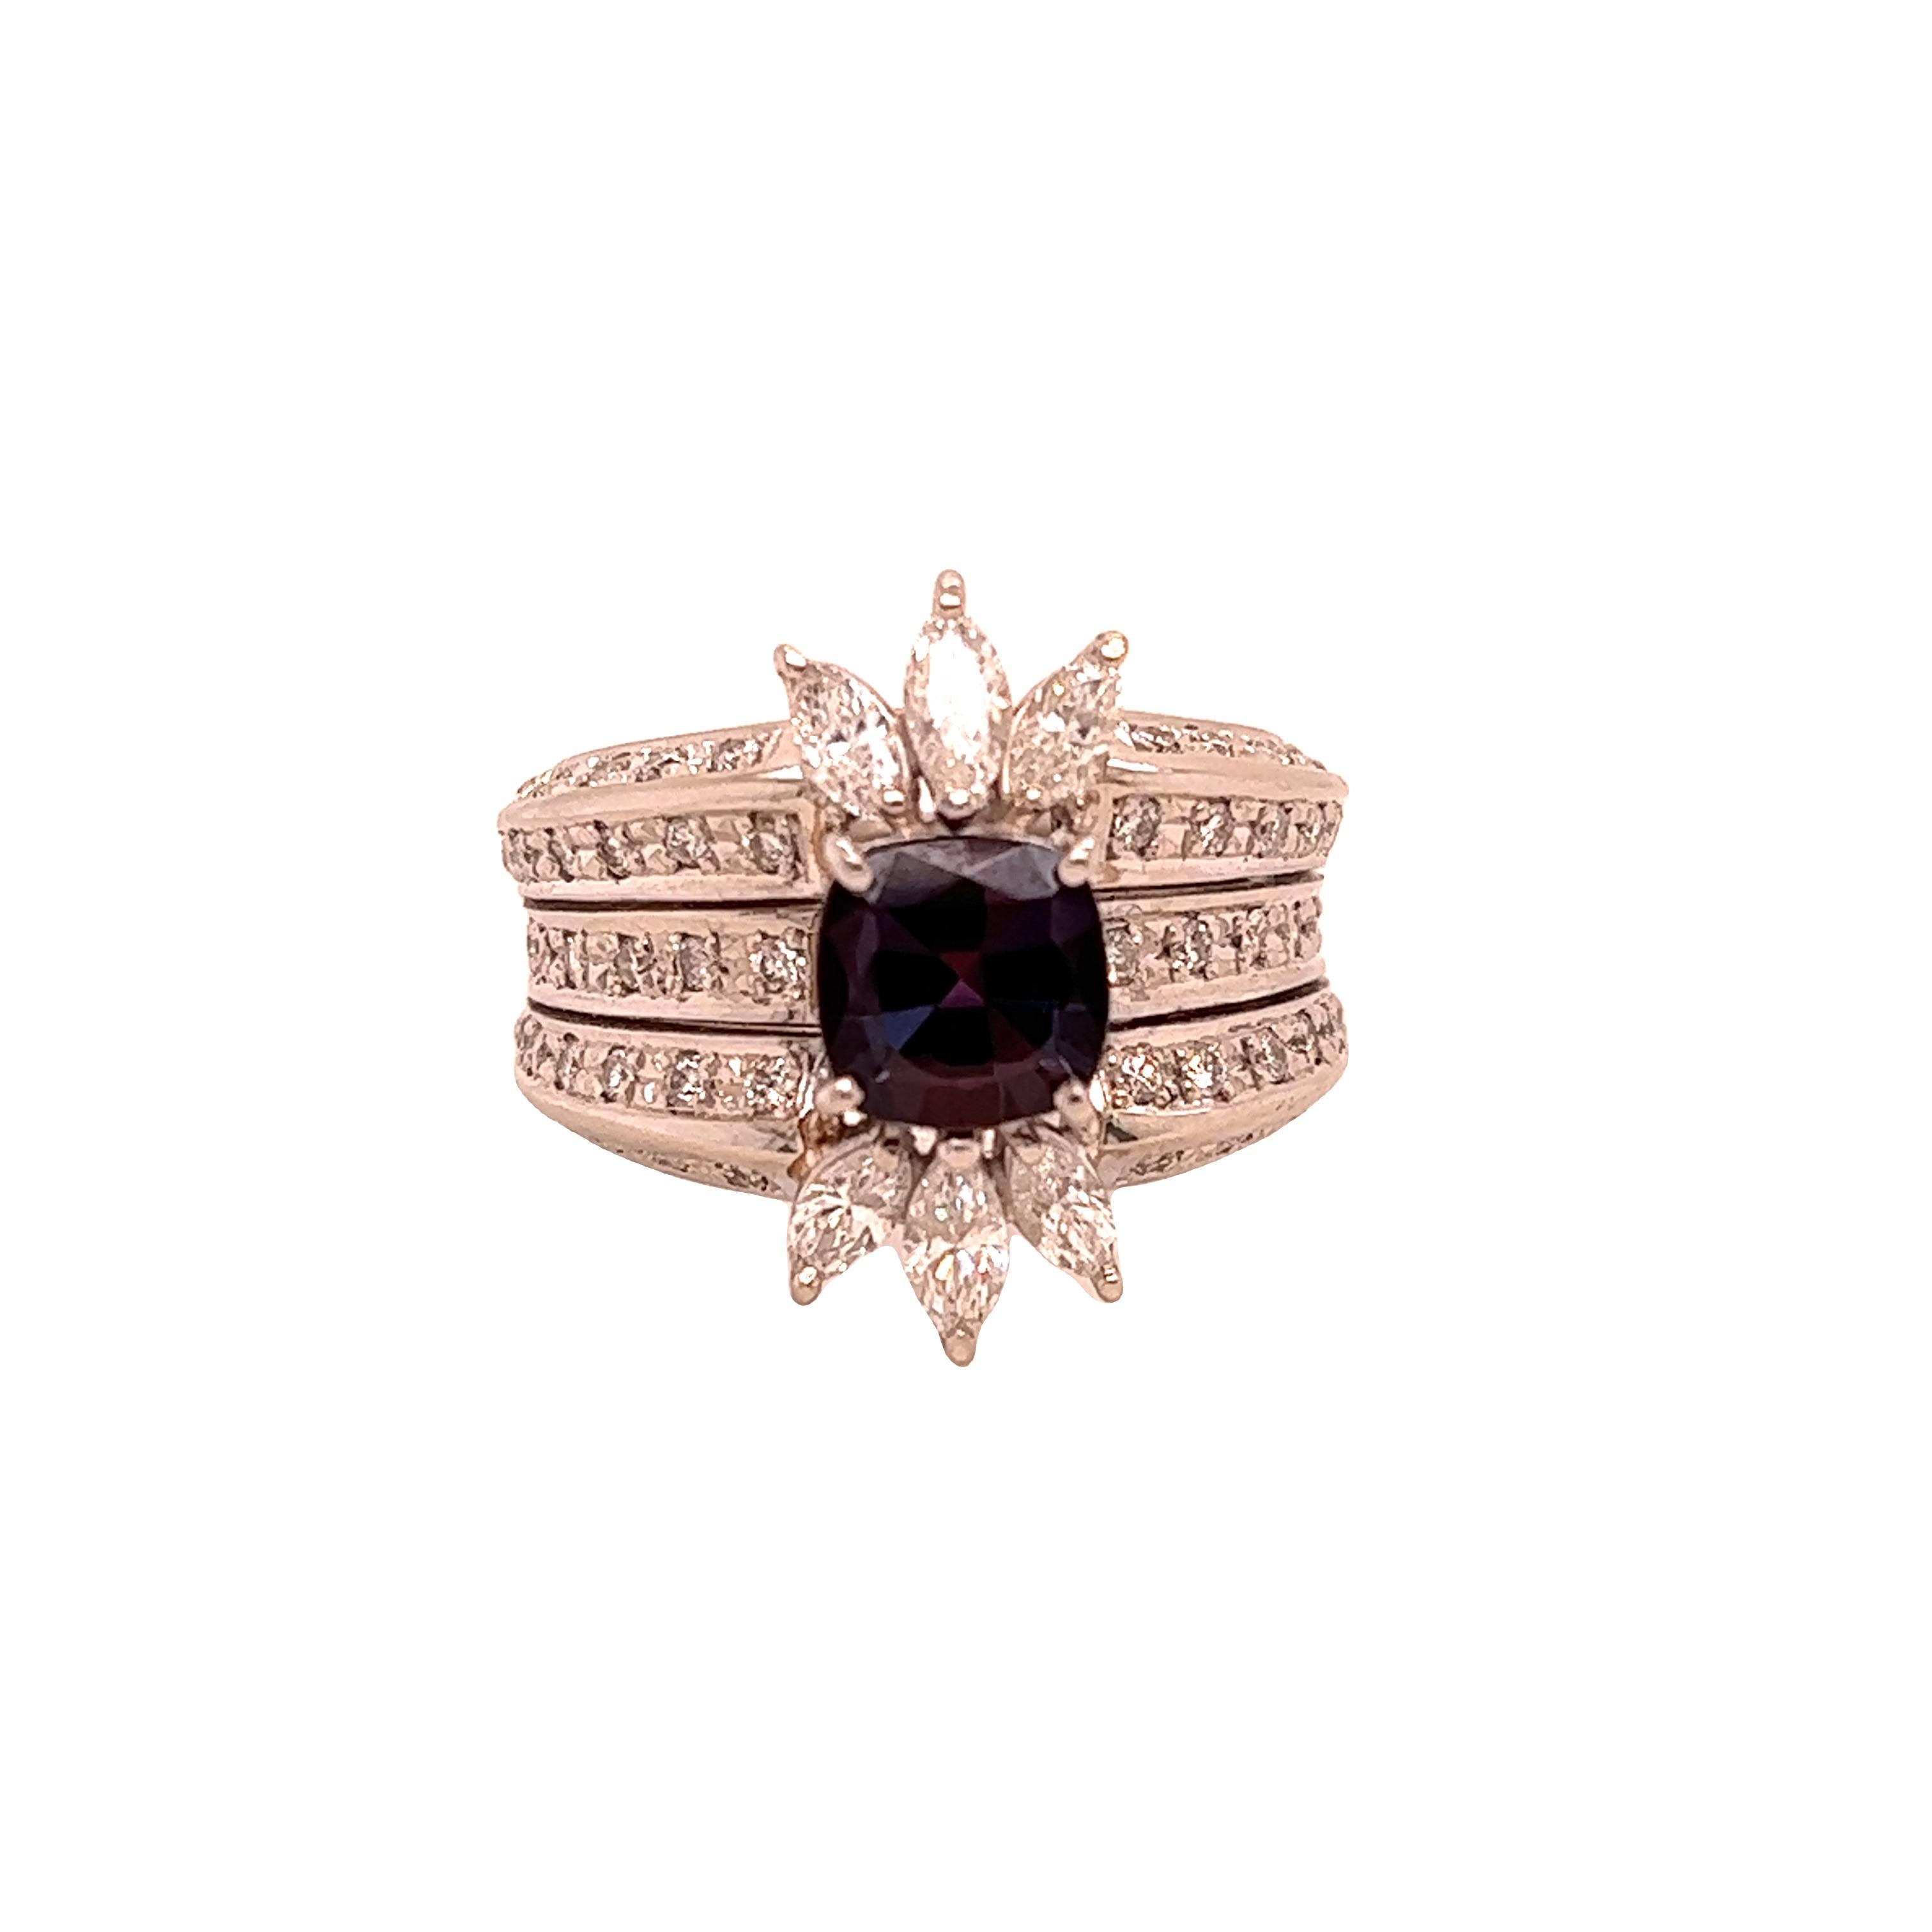 This is a gorgeous natural AAA quality cushion Alexandrite surrounded by dainty diamonds that is set in a vintage platinum setting. This ring features a natural 1.38 carat cushion alexandrite that is certified by the Gemological Institute of America